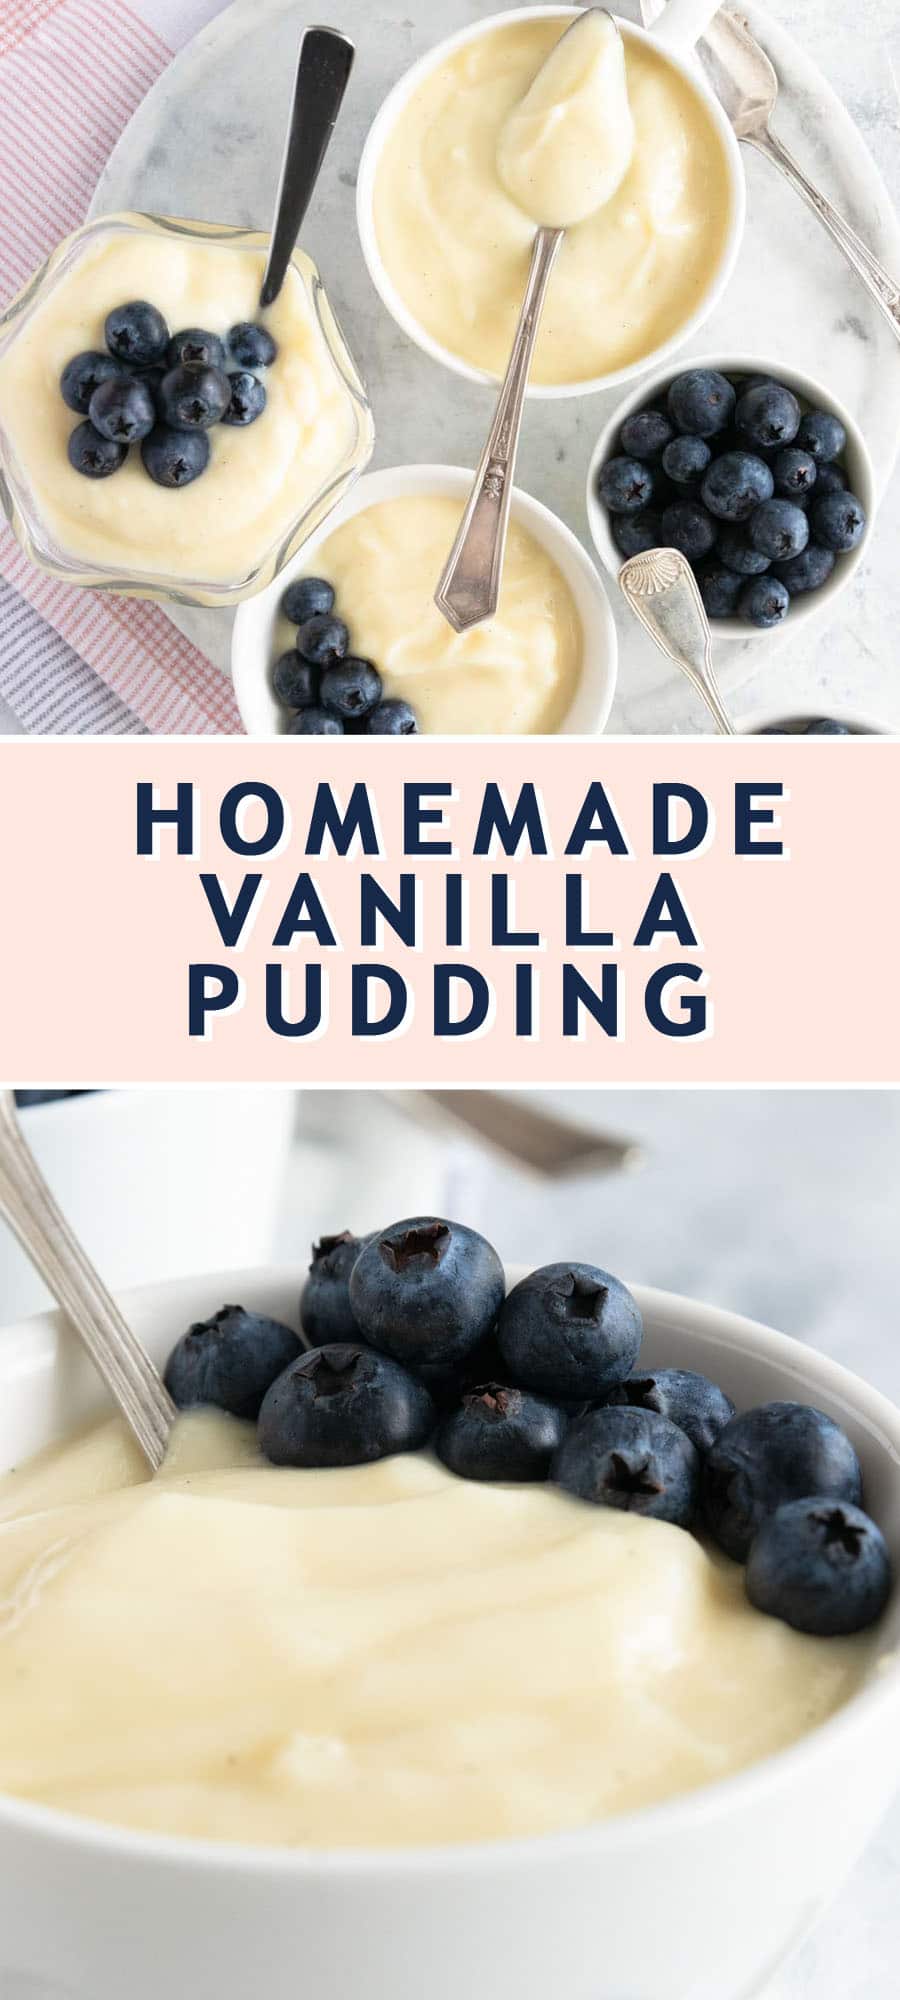 photo of the recipe card on how to make easy homemade vanilla pudding by top Houston lifestyle blogger Ashley Rose of Sugar & Cloth